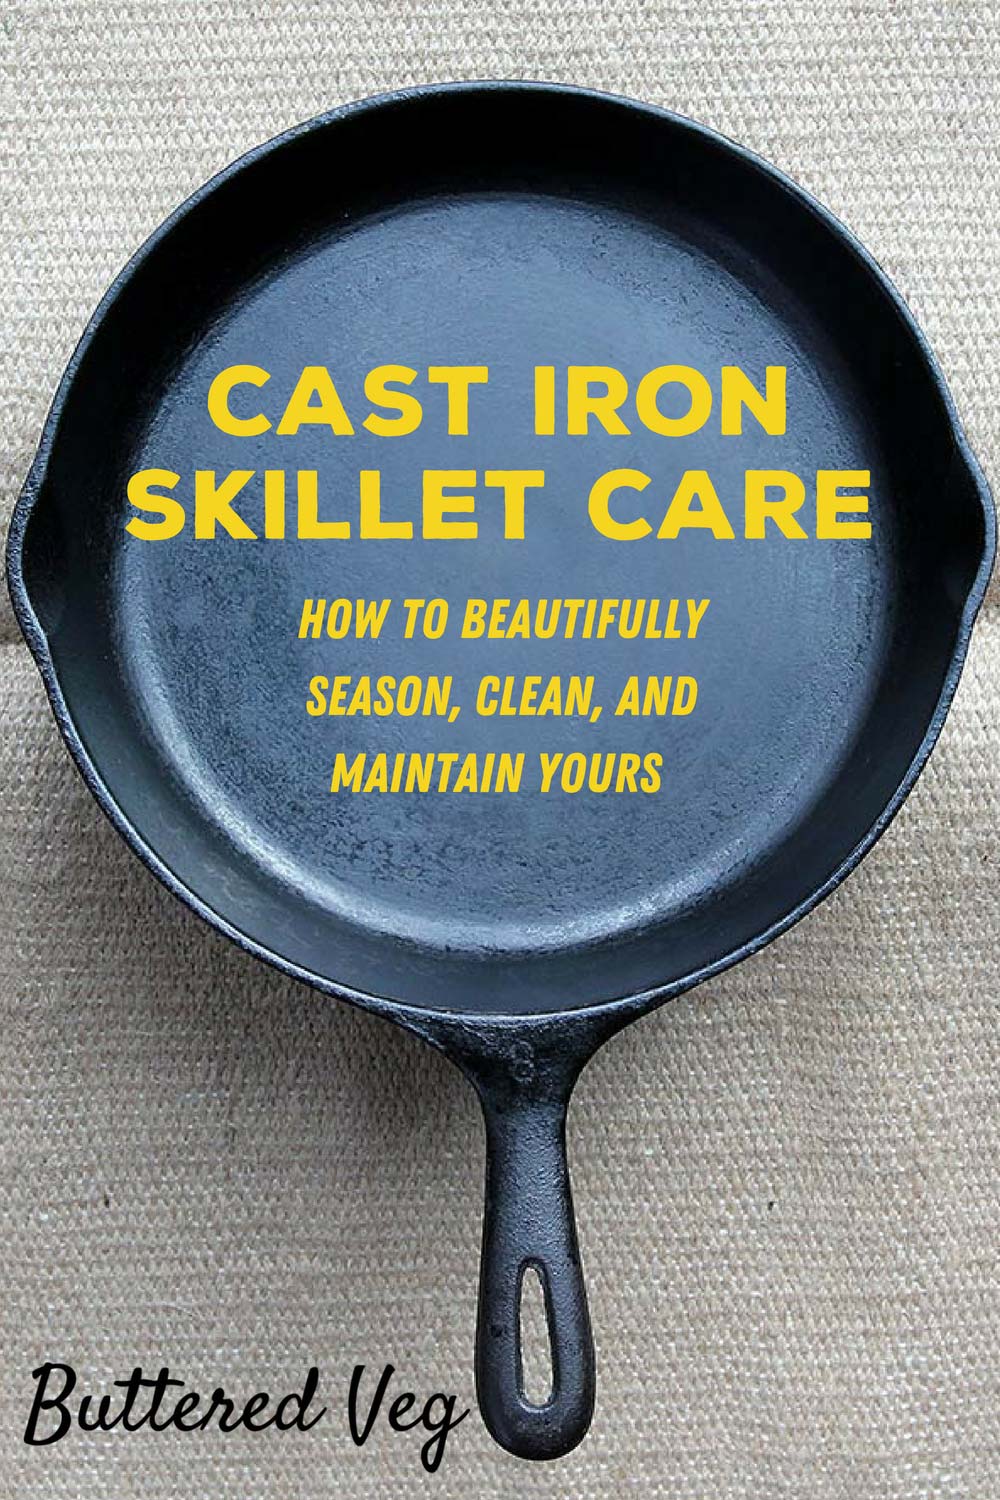 How To Clean, Season, And Maintain Your Cast Iron Skillet